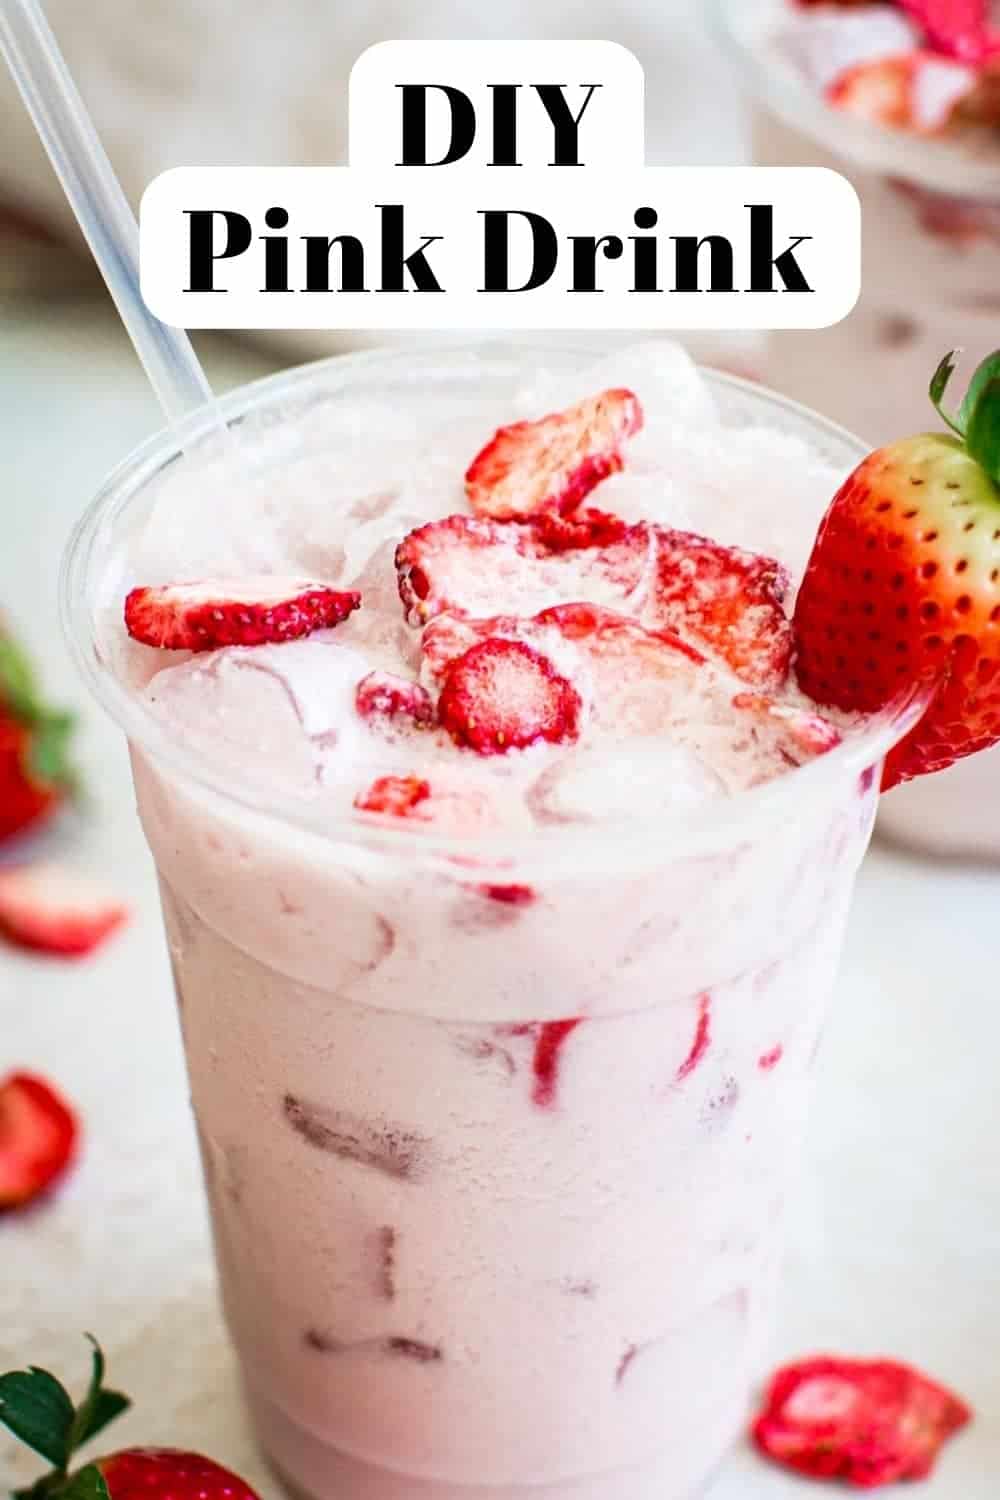 Pink drink with name overlayed onto the picture.